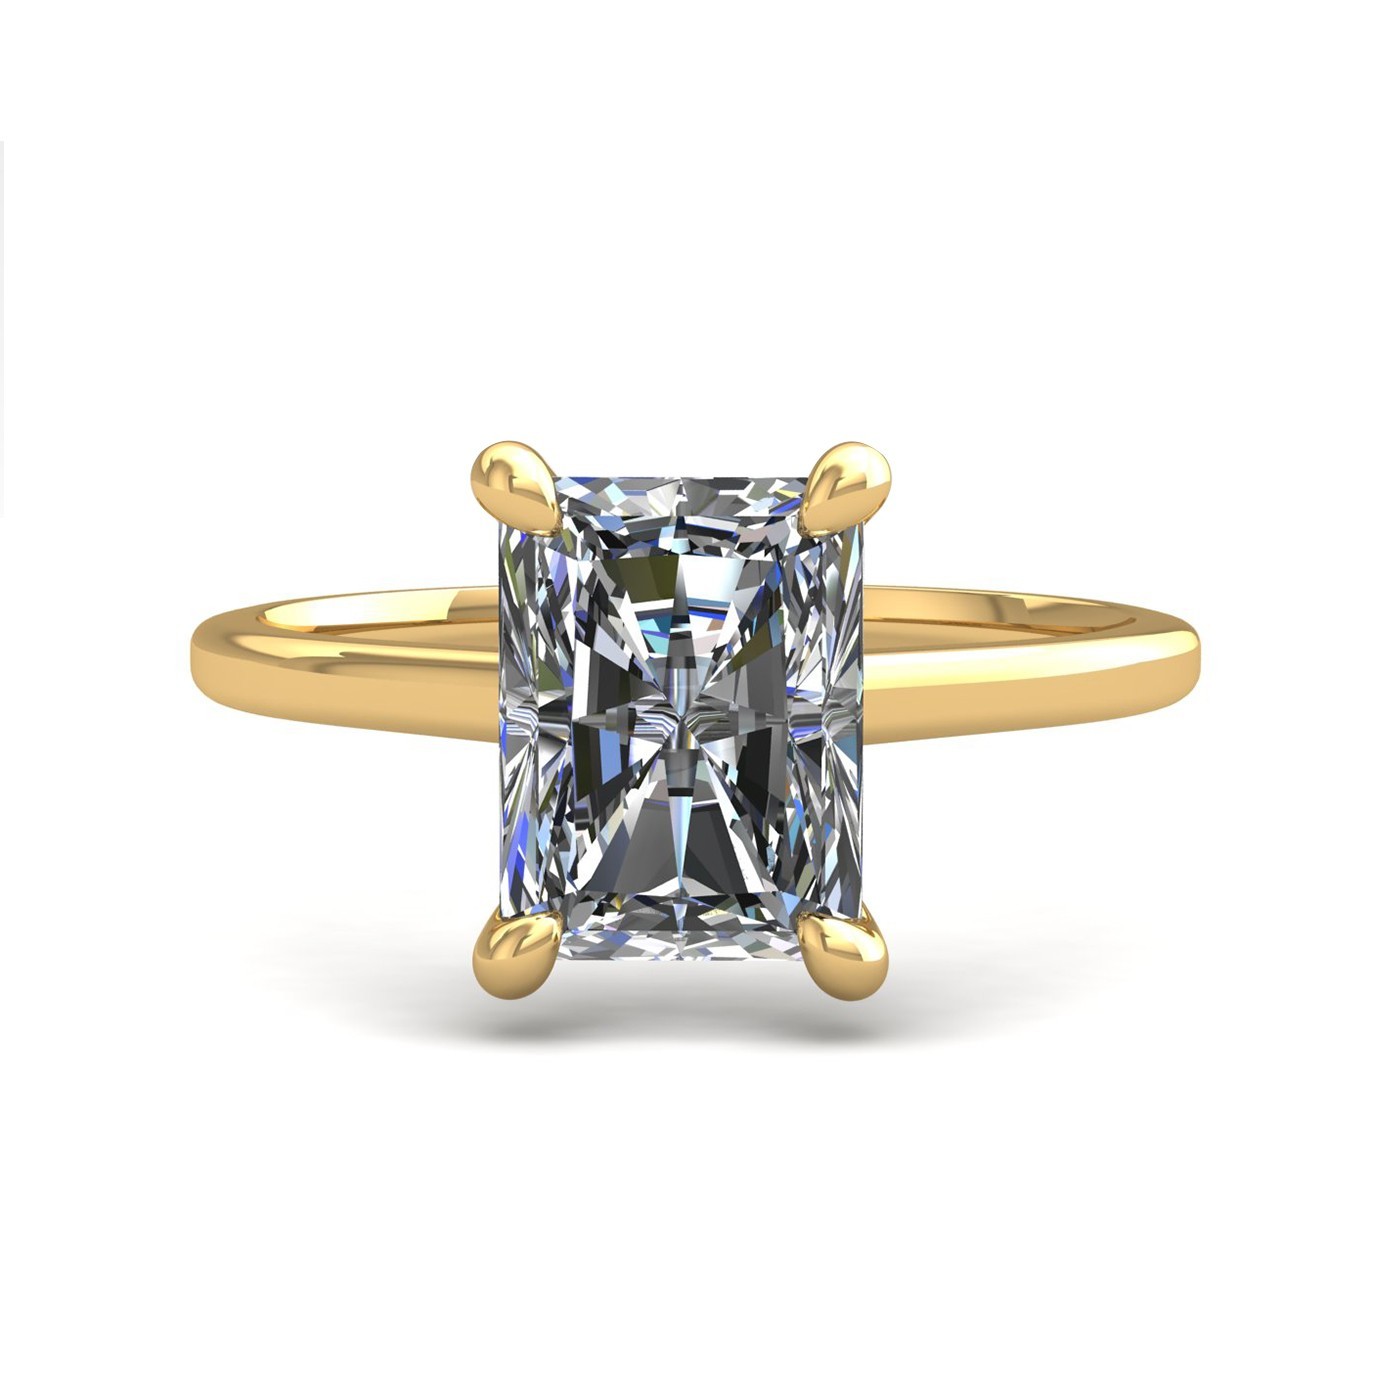 18k yellow gold  0,50 ct 4 prongs solitaire radiant cut diamond engagement ring with whisper thin band Photos & images